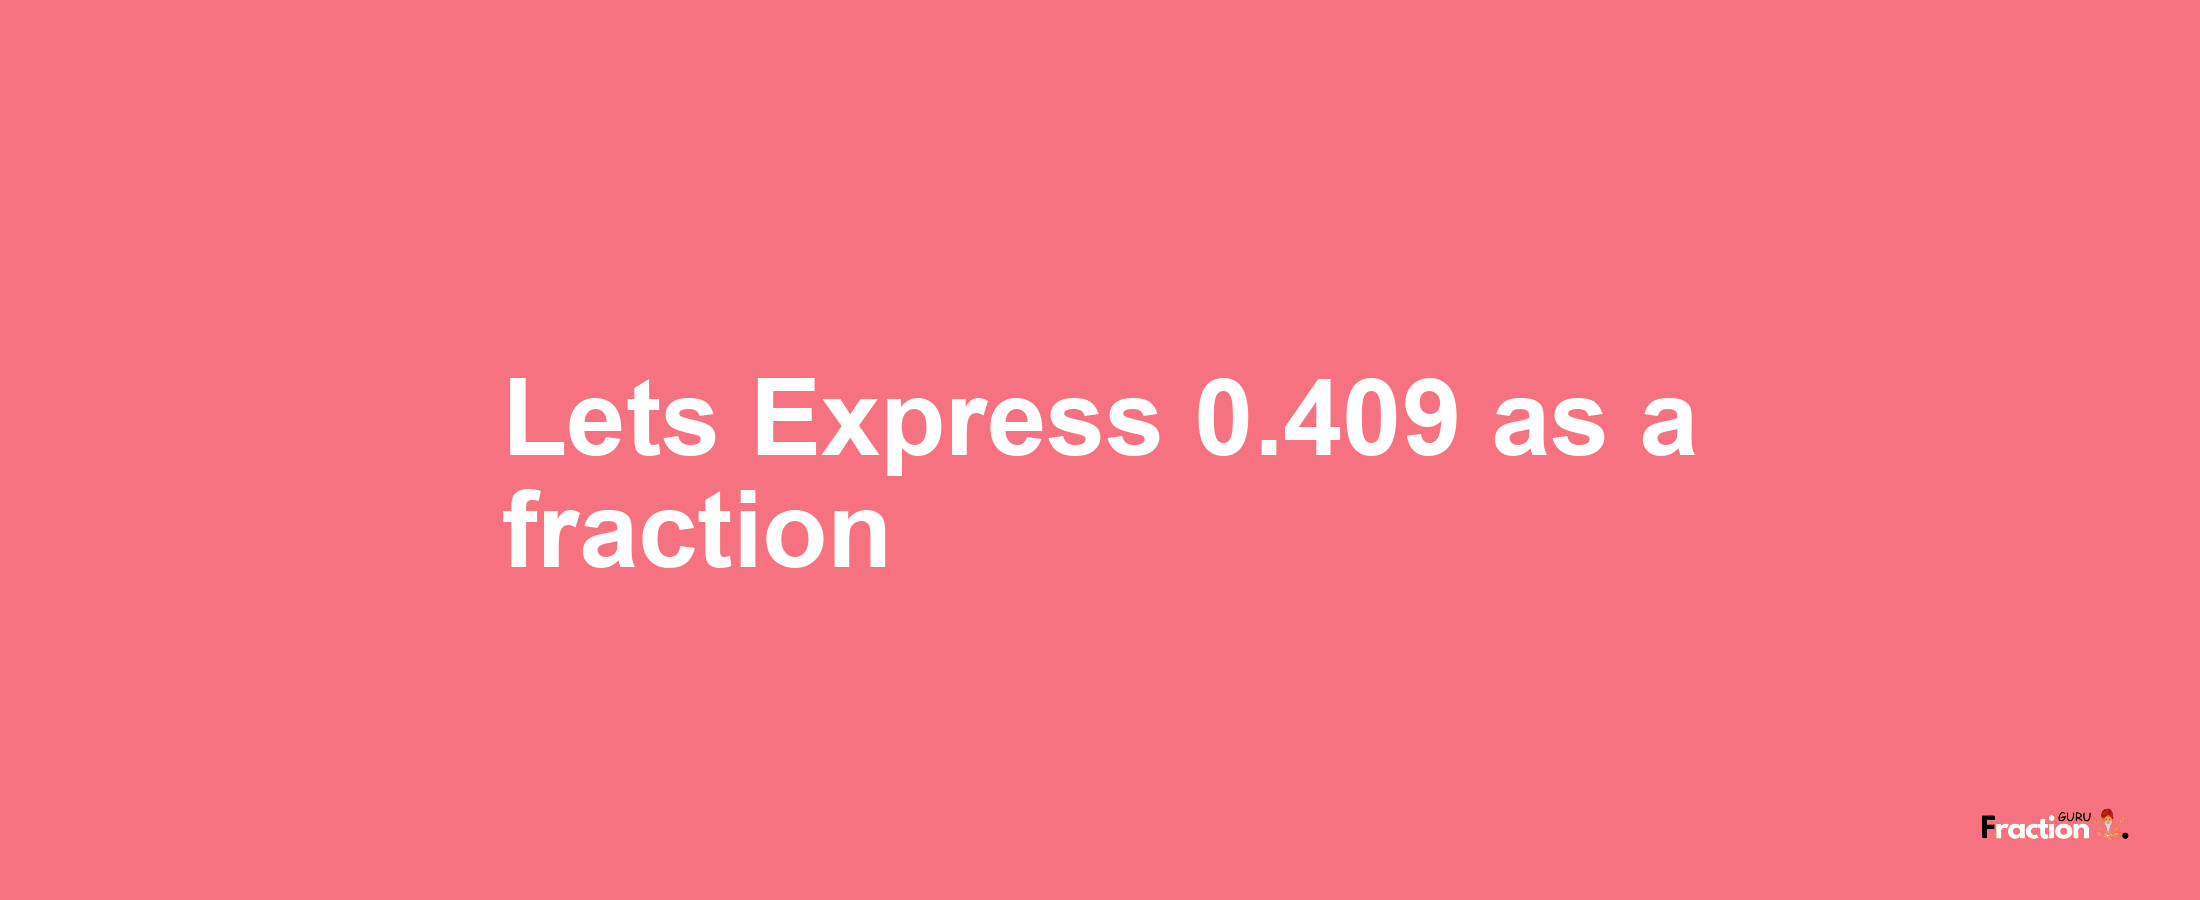 Lets Express 0.409 as afraction